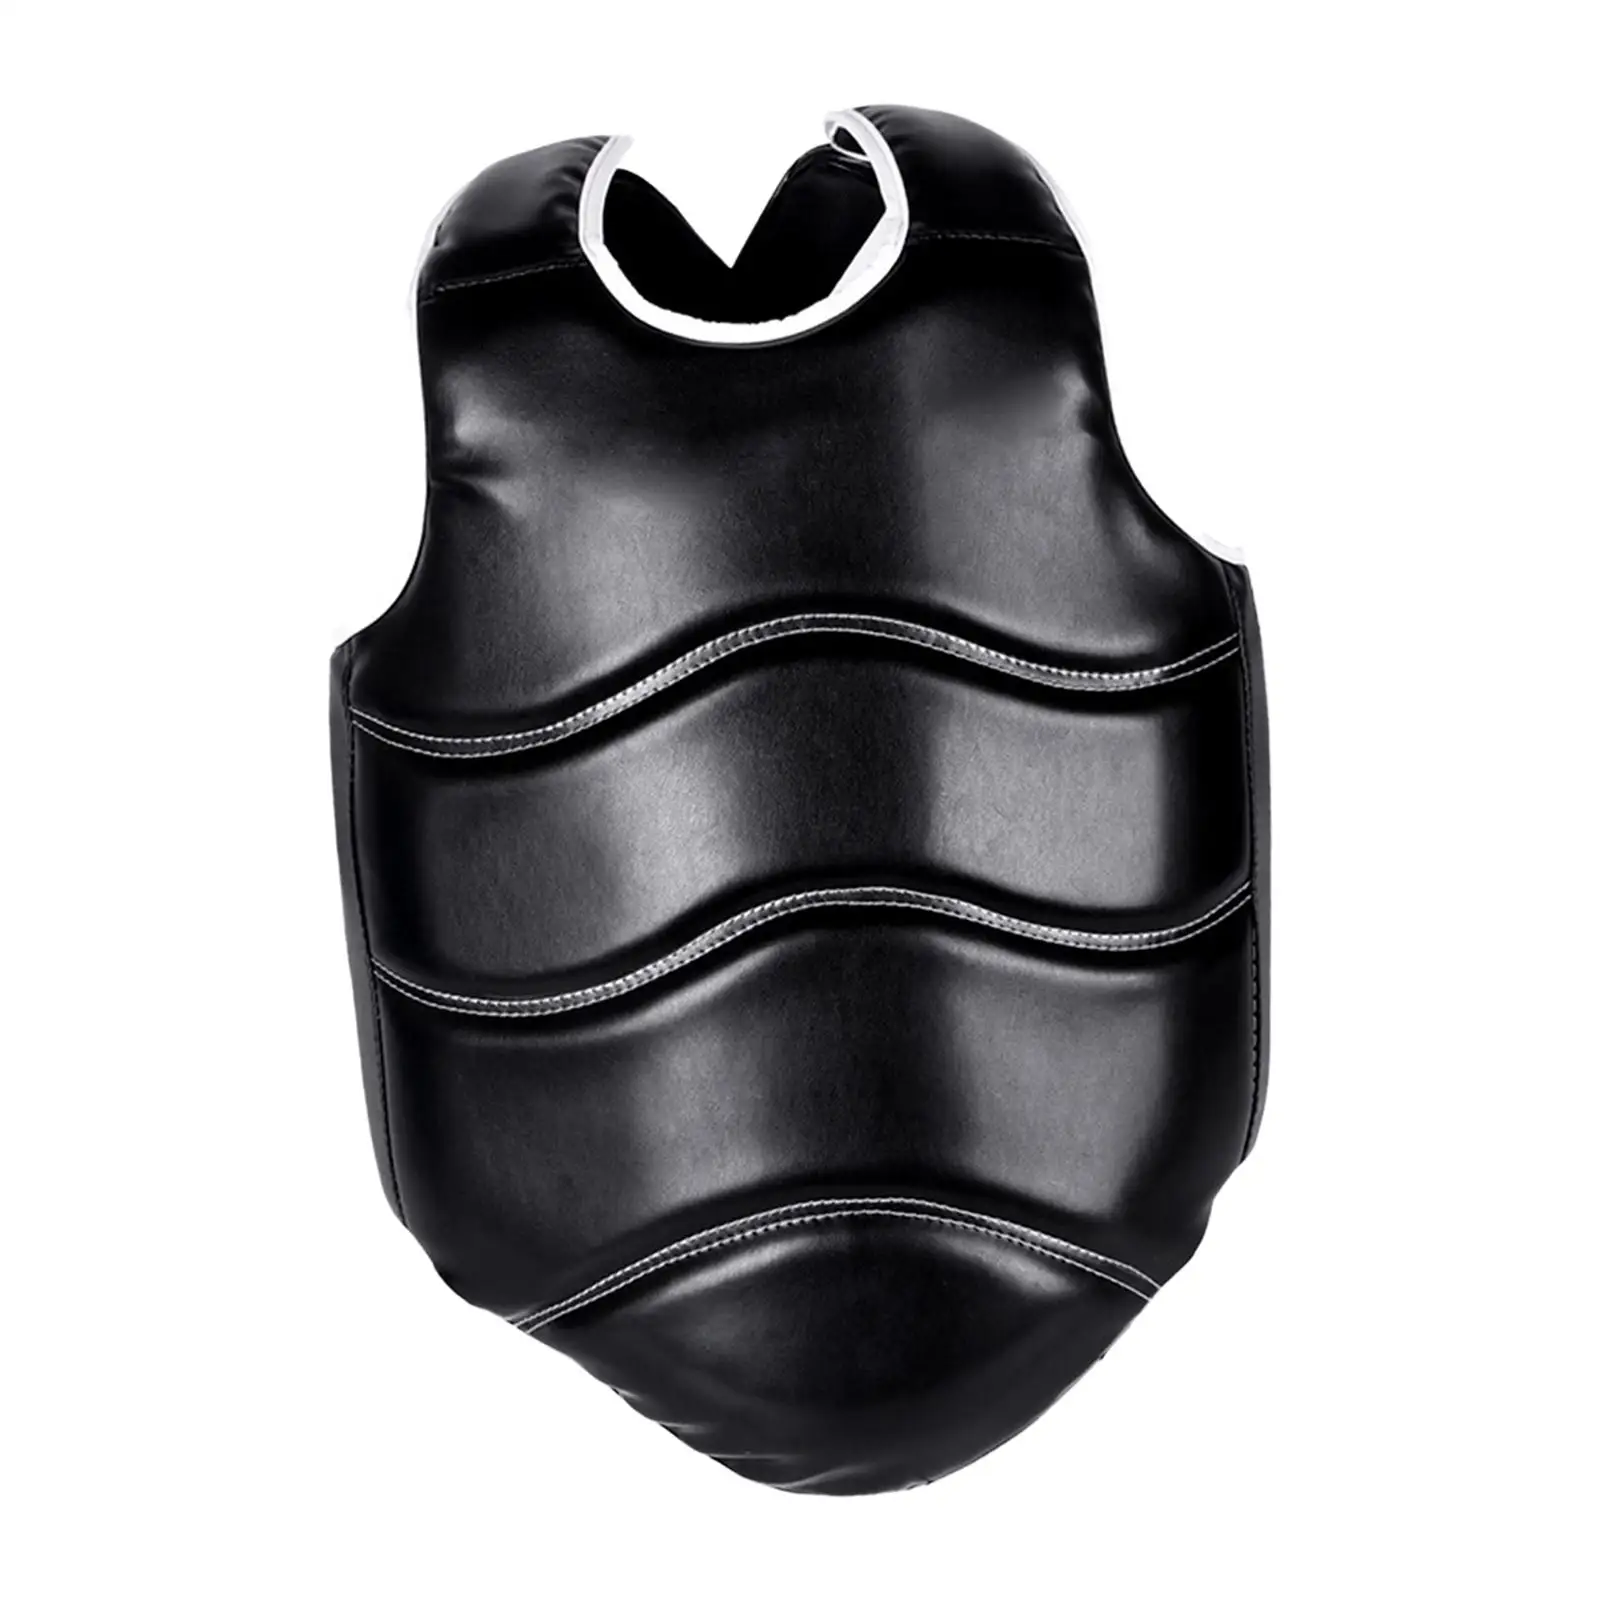 Boxing Chest Guard Bodyguard Shock Resistant Karate Chest Protector Chest Gear for Teen Kids Adults Muay Thai Kickboxing Sanda